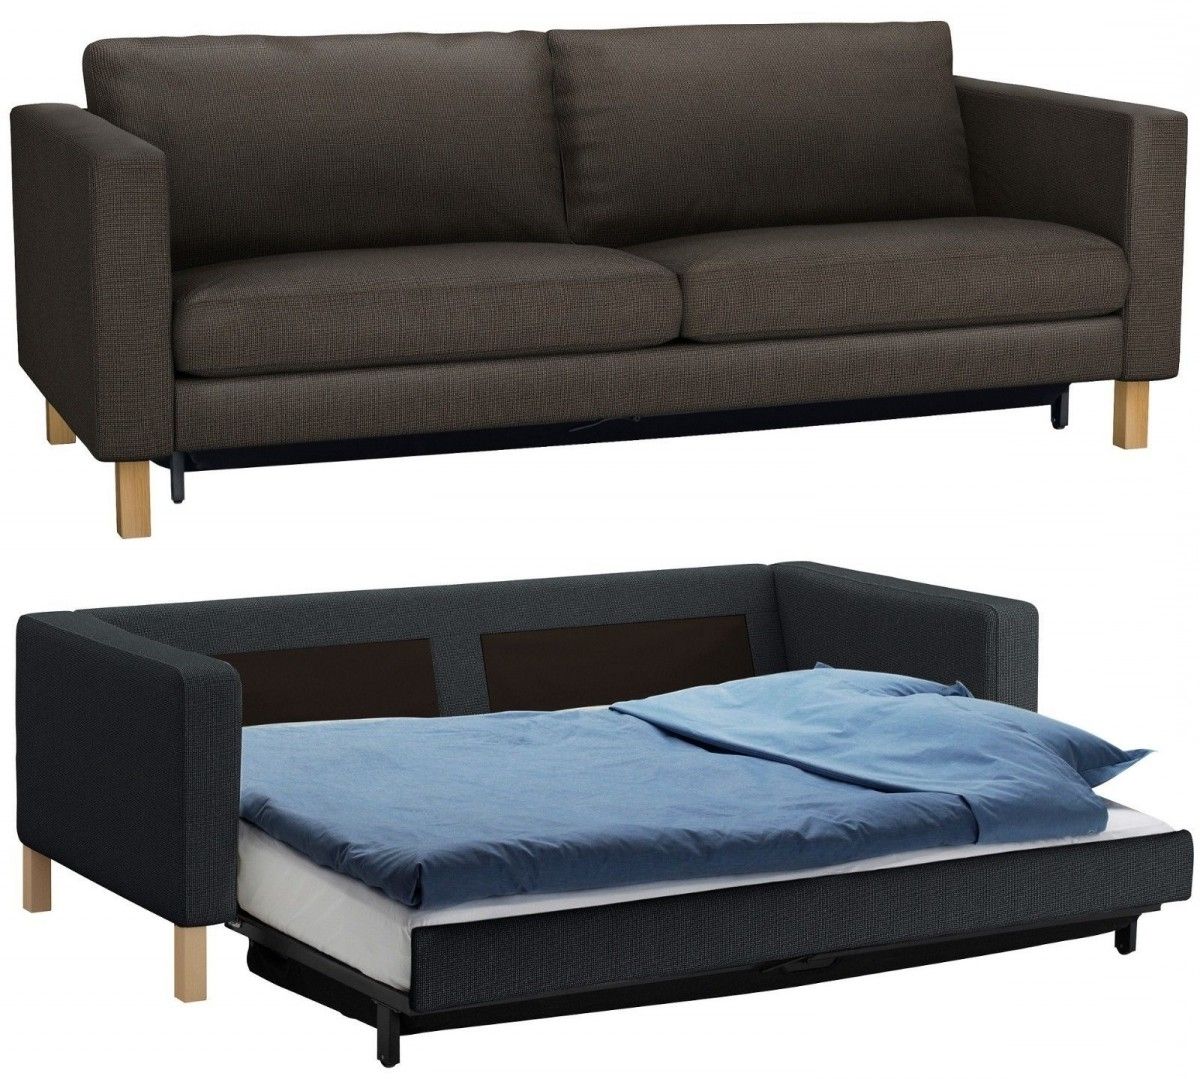 About The Ikea Sleeper Sofa – S3net – Sectional Sofas Sale : S3net With Regard To Most Popular Ikea Sectional Sofa Beds (View 16 of 20)